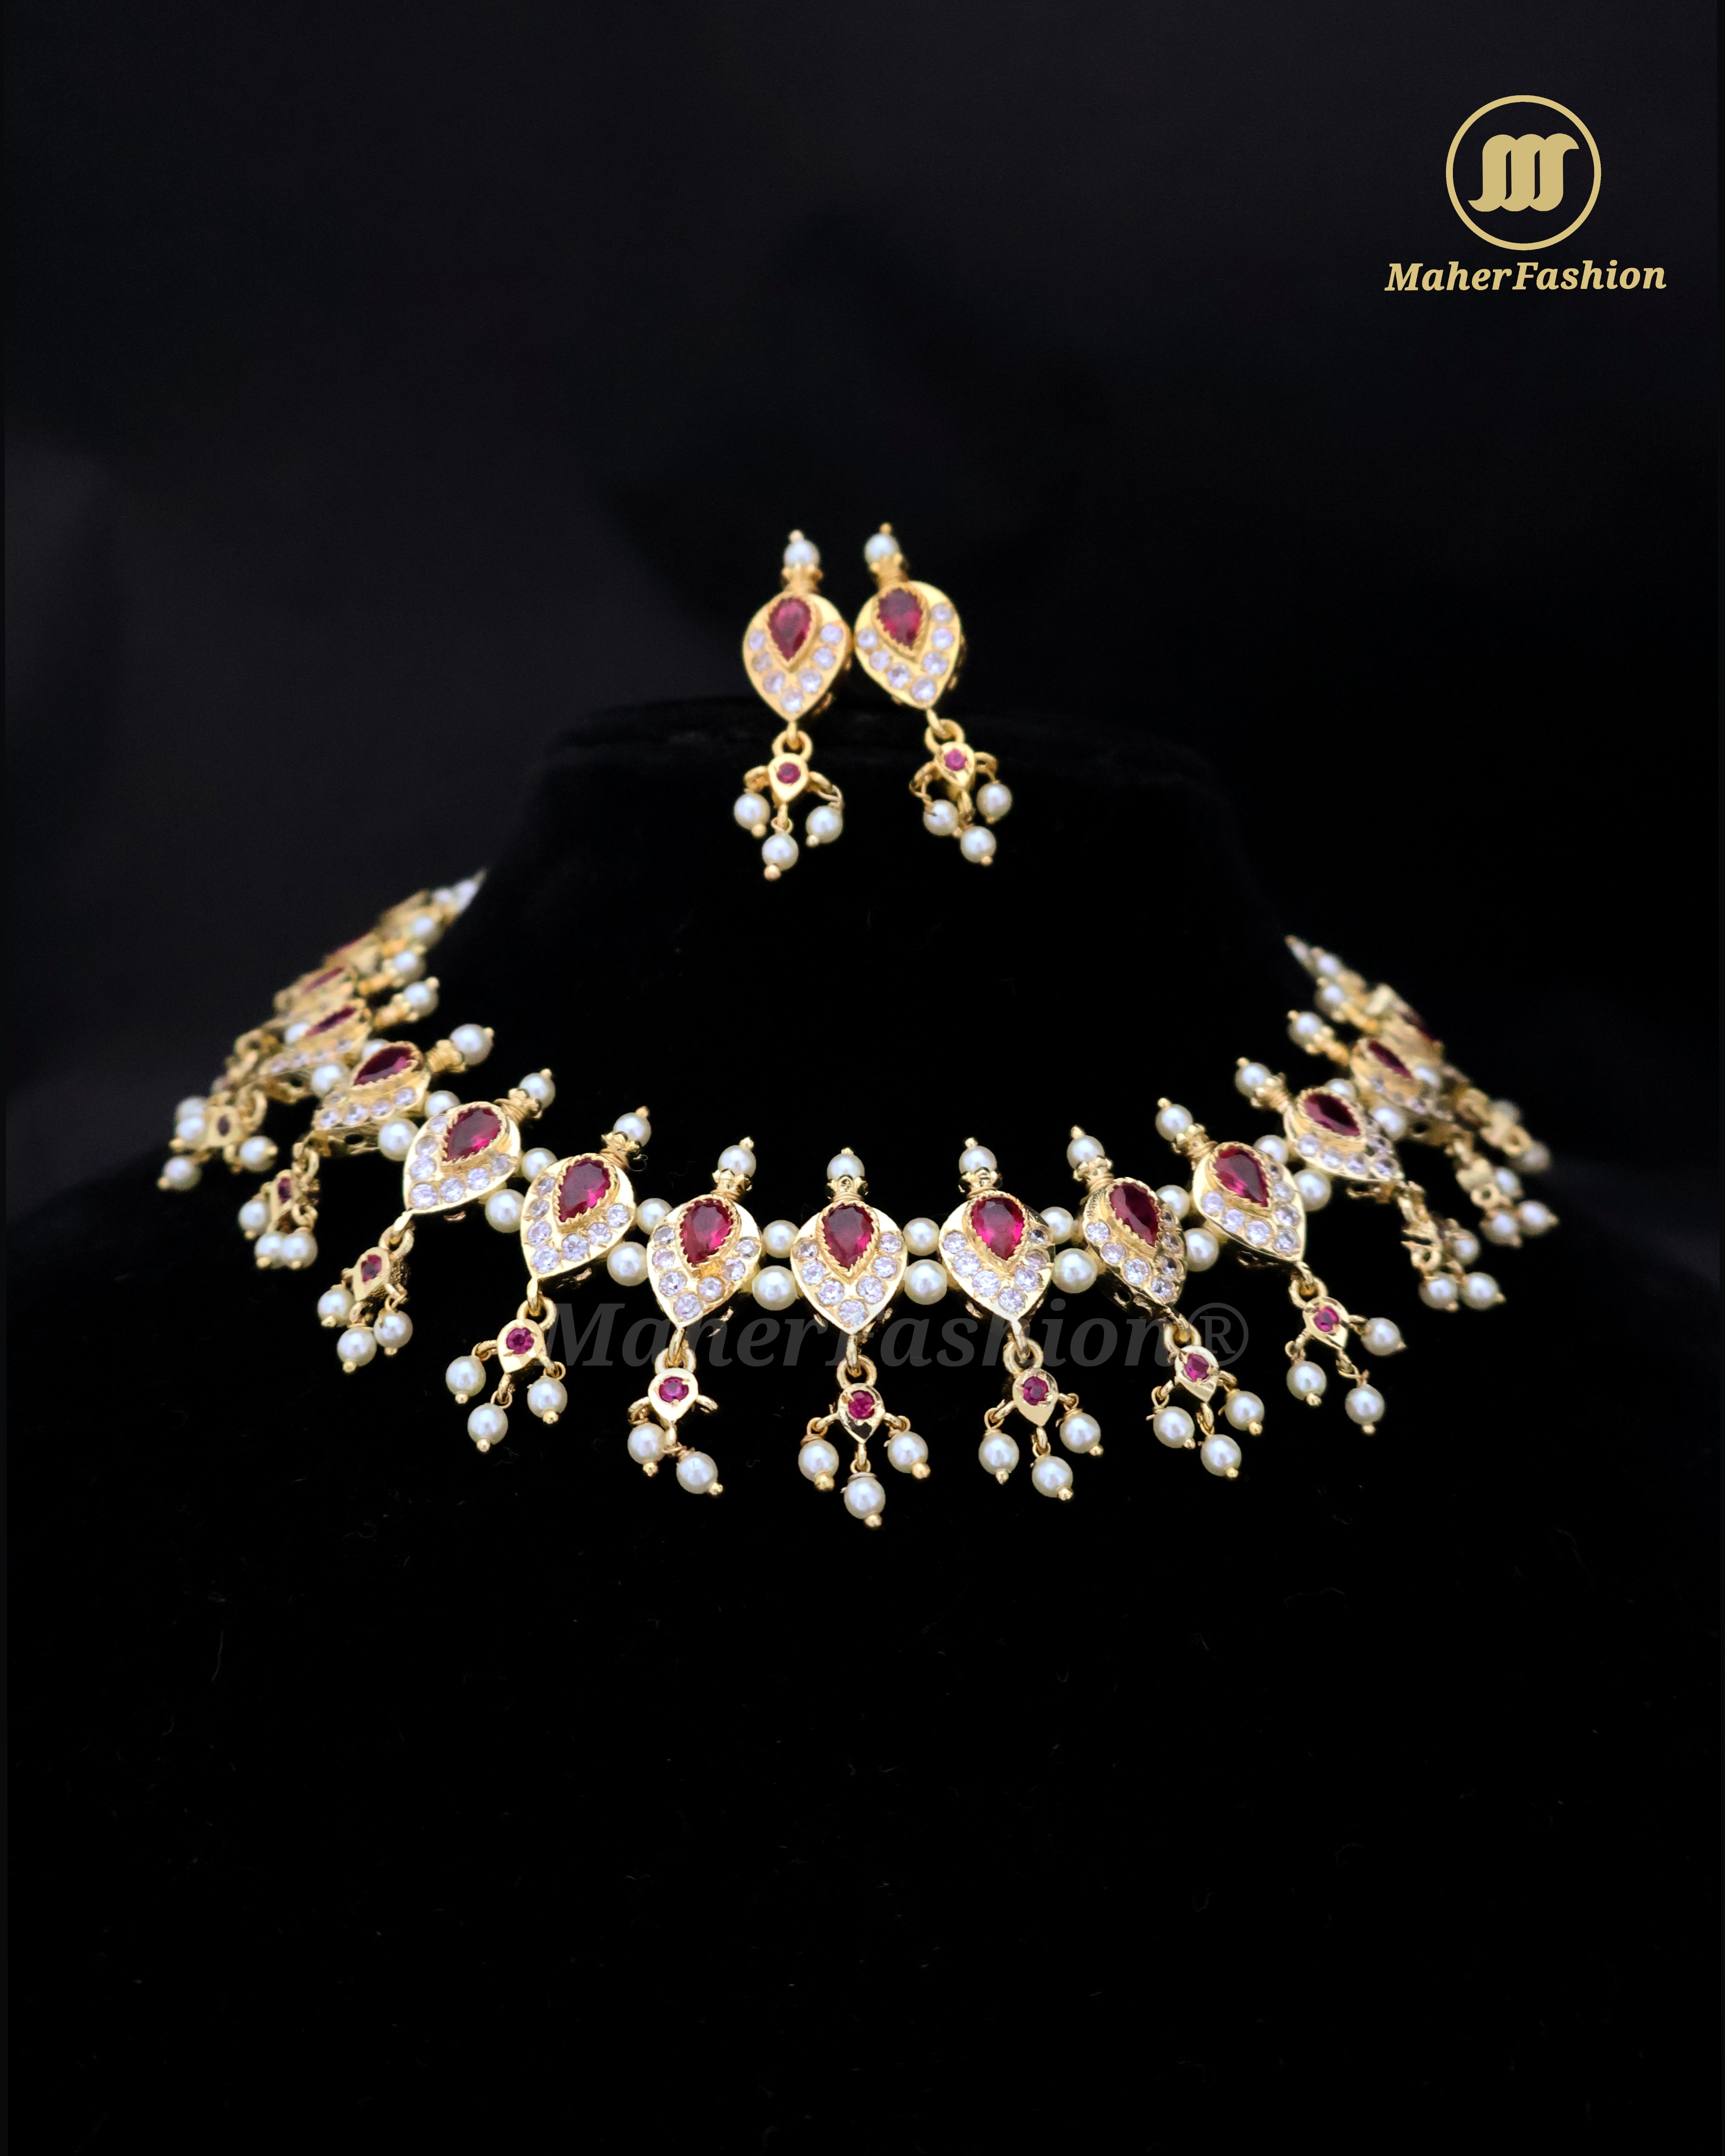 Chinchpeti Haar in 2 Strings with Pink & White Stone_Maherfashion